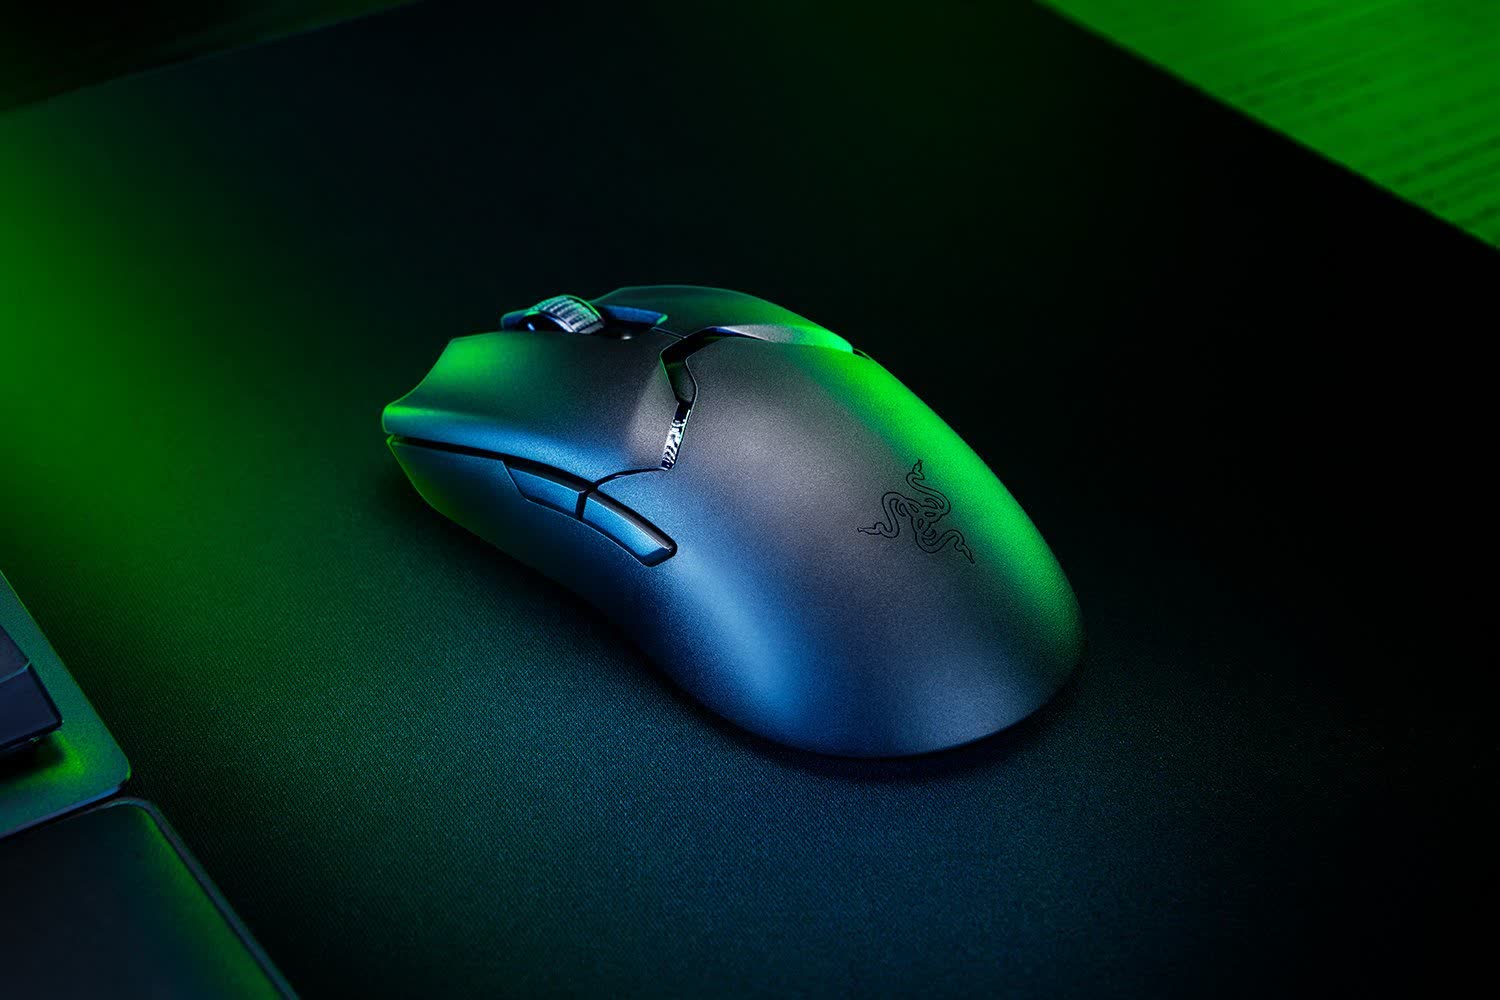 Razer's new Viper V2 Pro wireless gaming mouse weighs just 58g